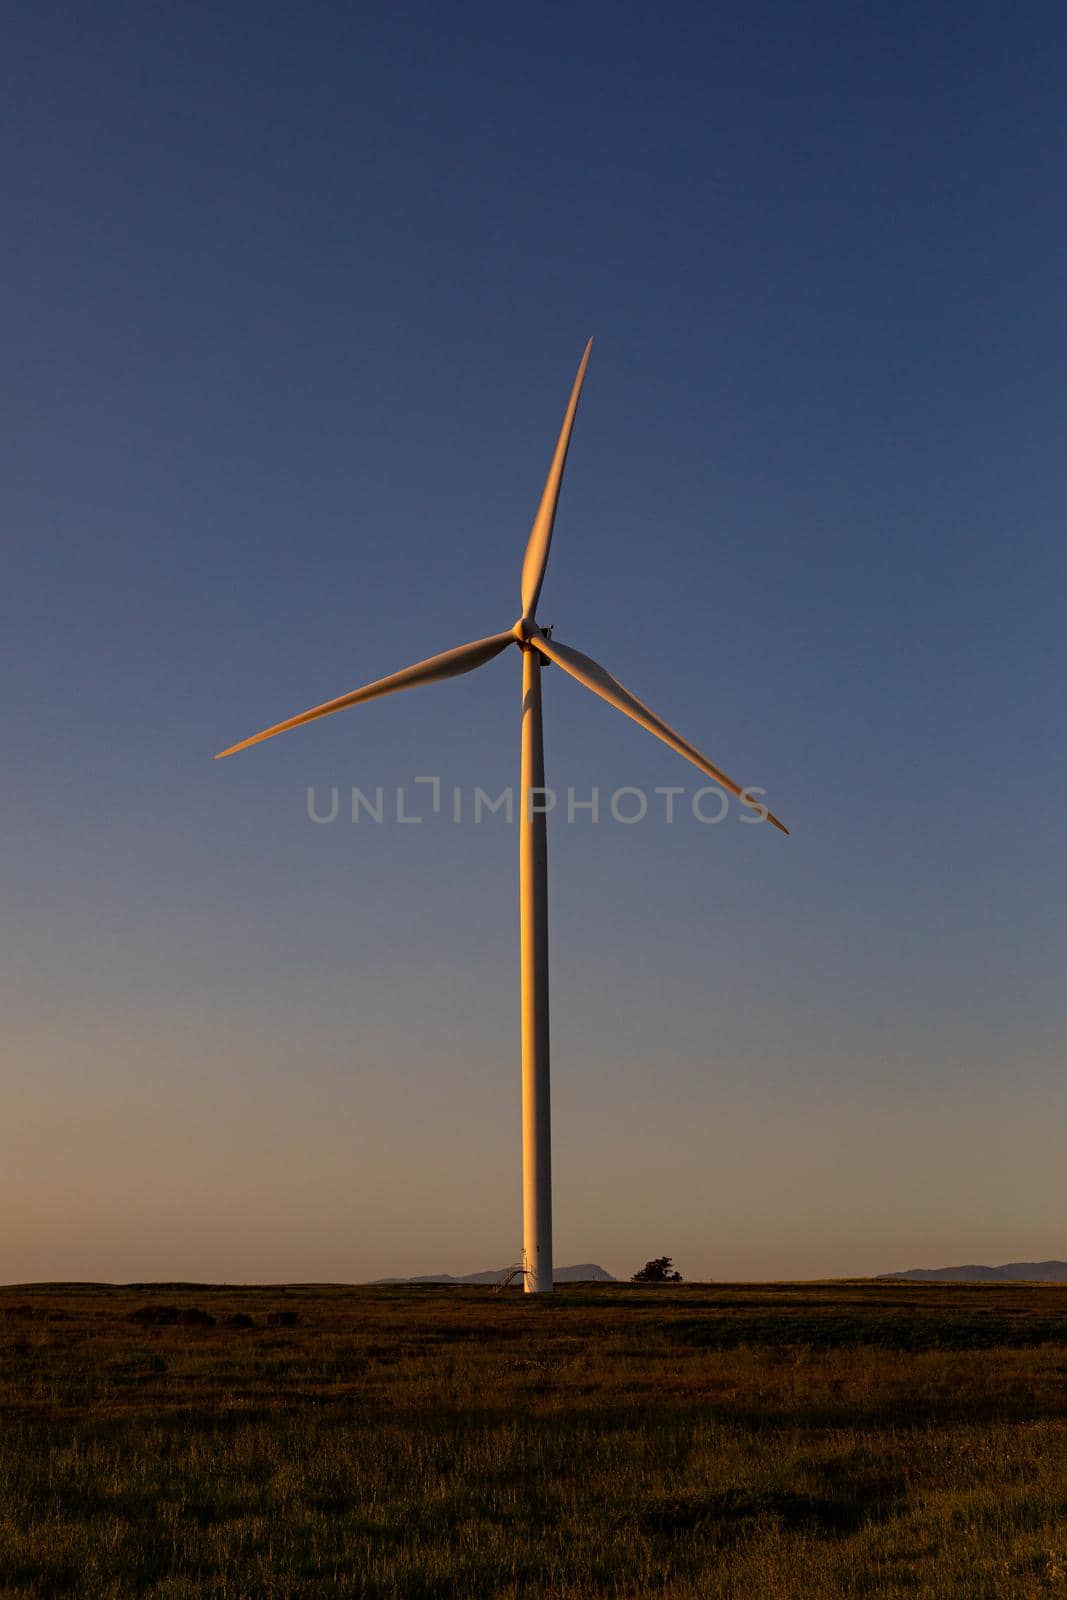 General view of wind turbine in countryside landscape during sunset. environment, sustainability, ecology, renewable energy, global warming and climate change awareness.